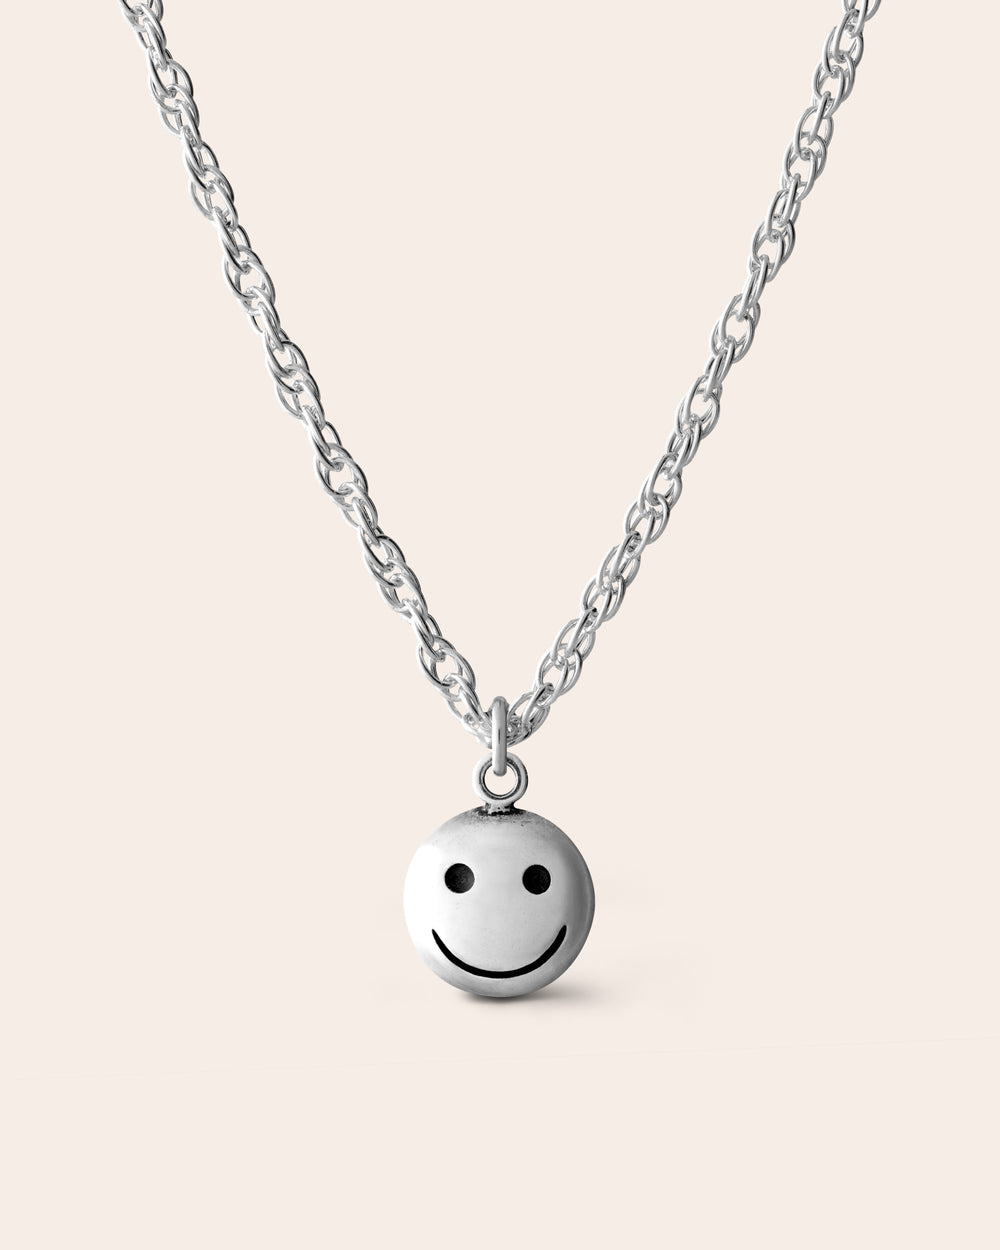 Smile Baby - The Smiley Face Necklace